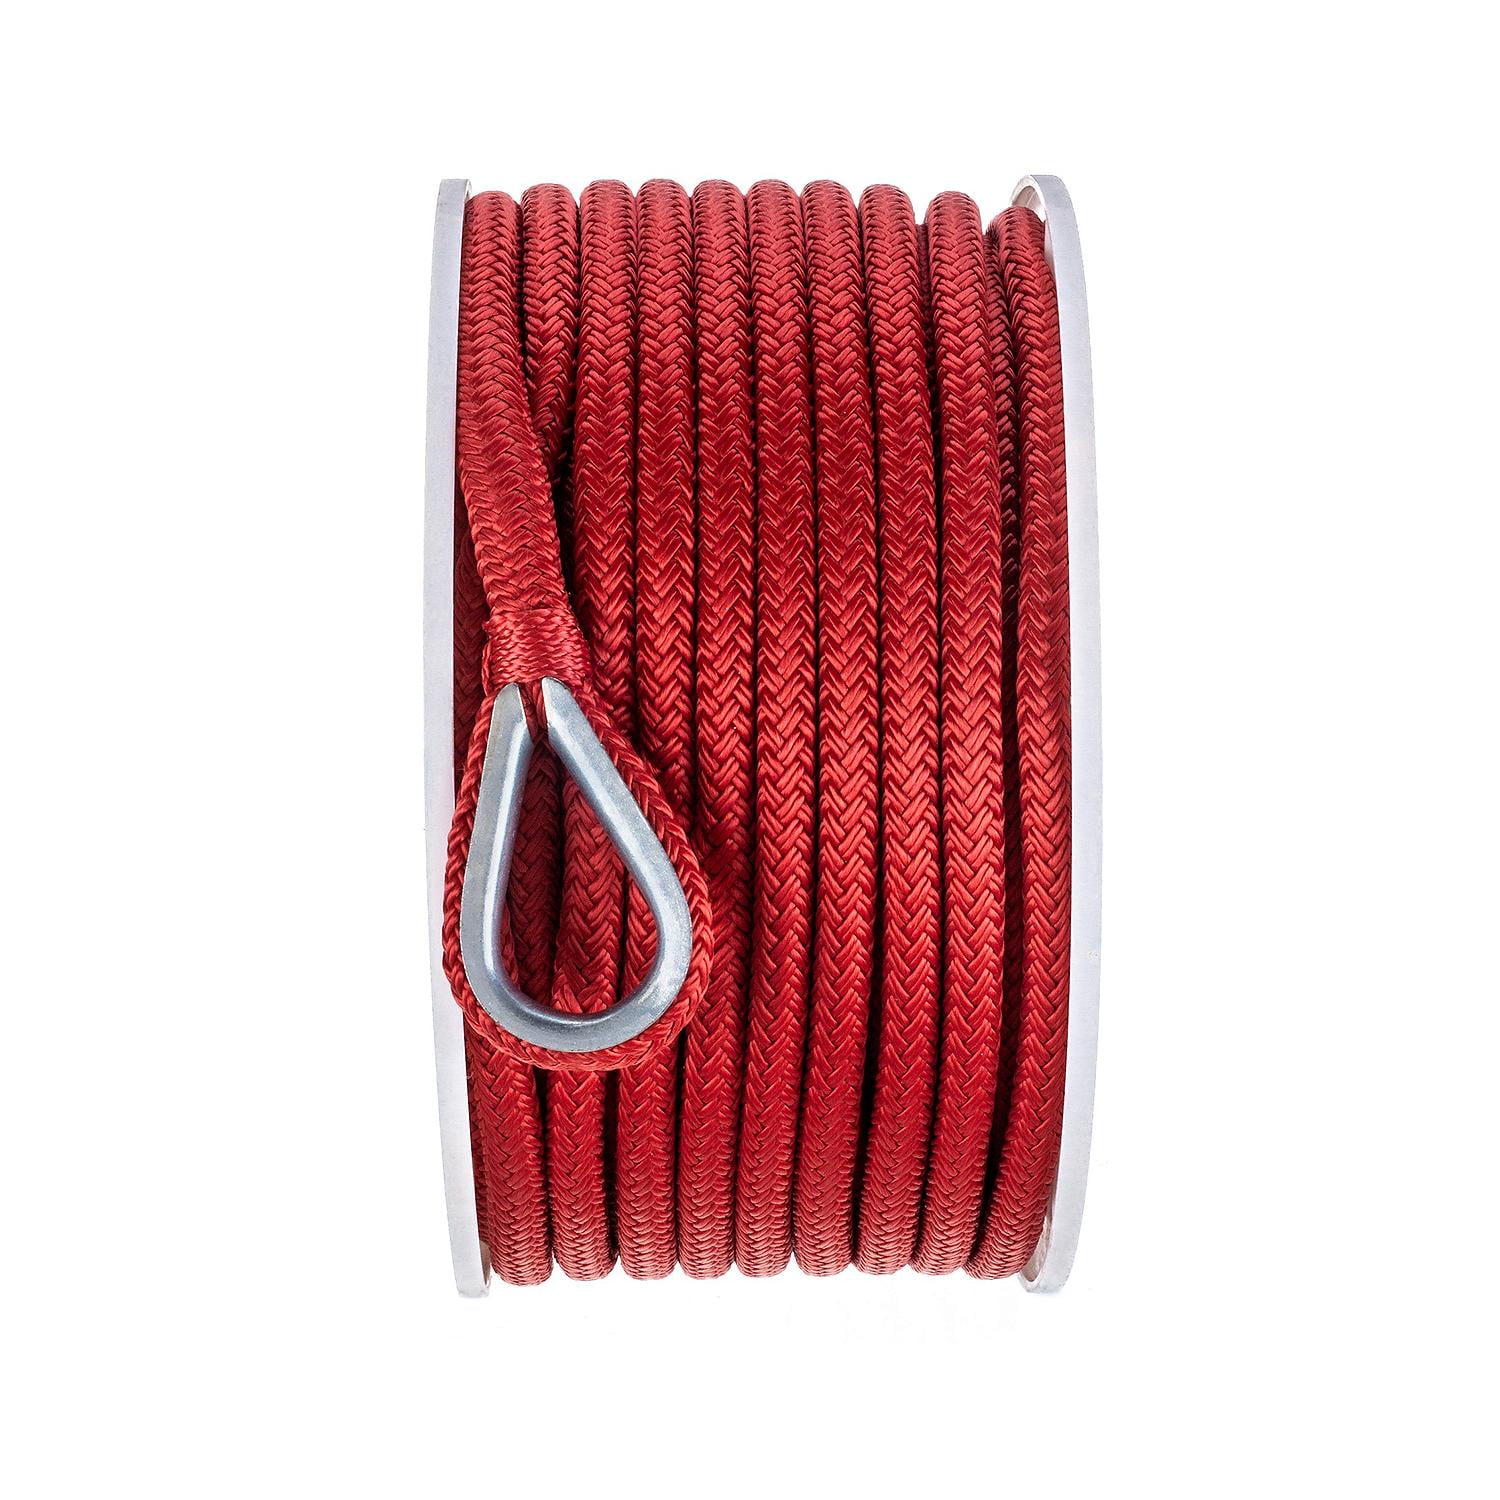 Premium Boat Anchor Rope 100 Ft Double Braided Boat Vietnam